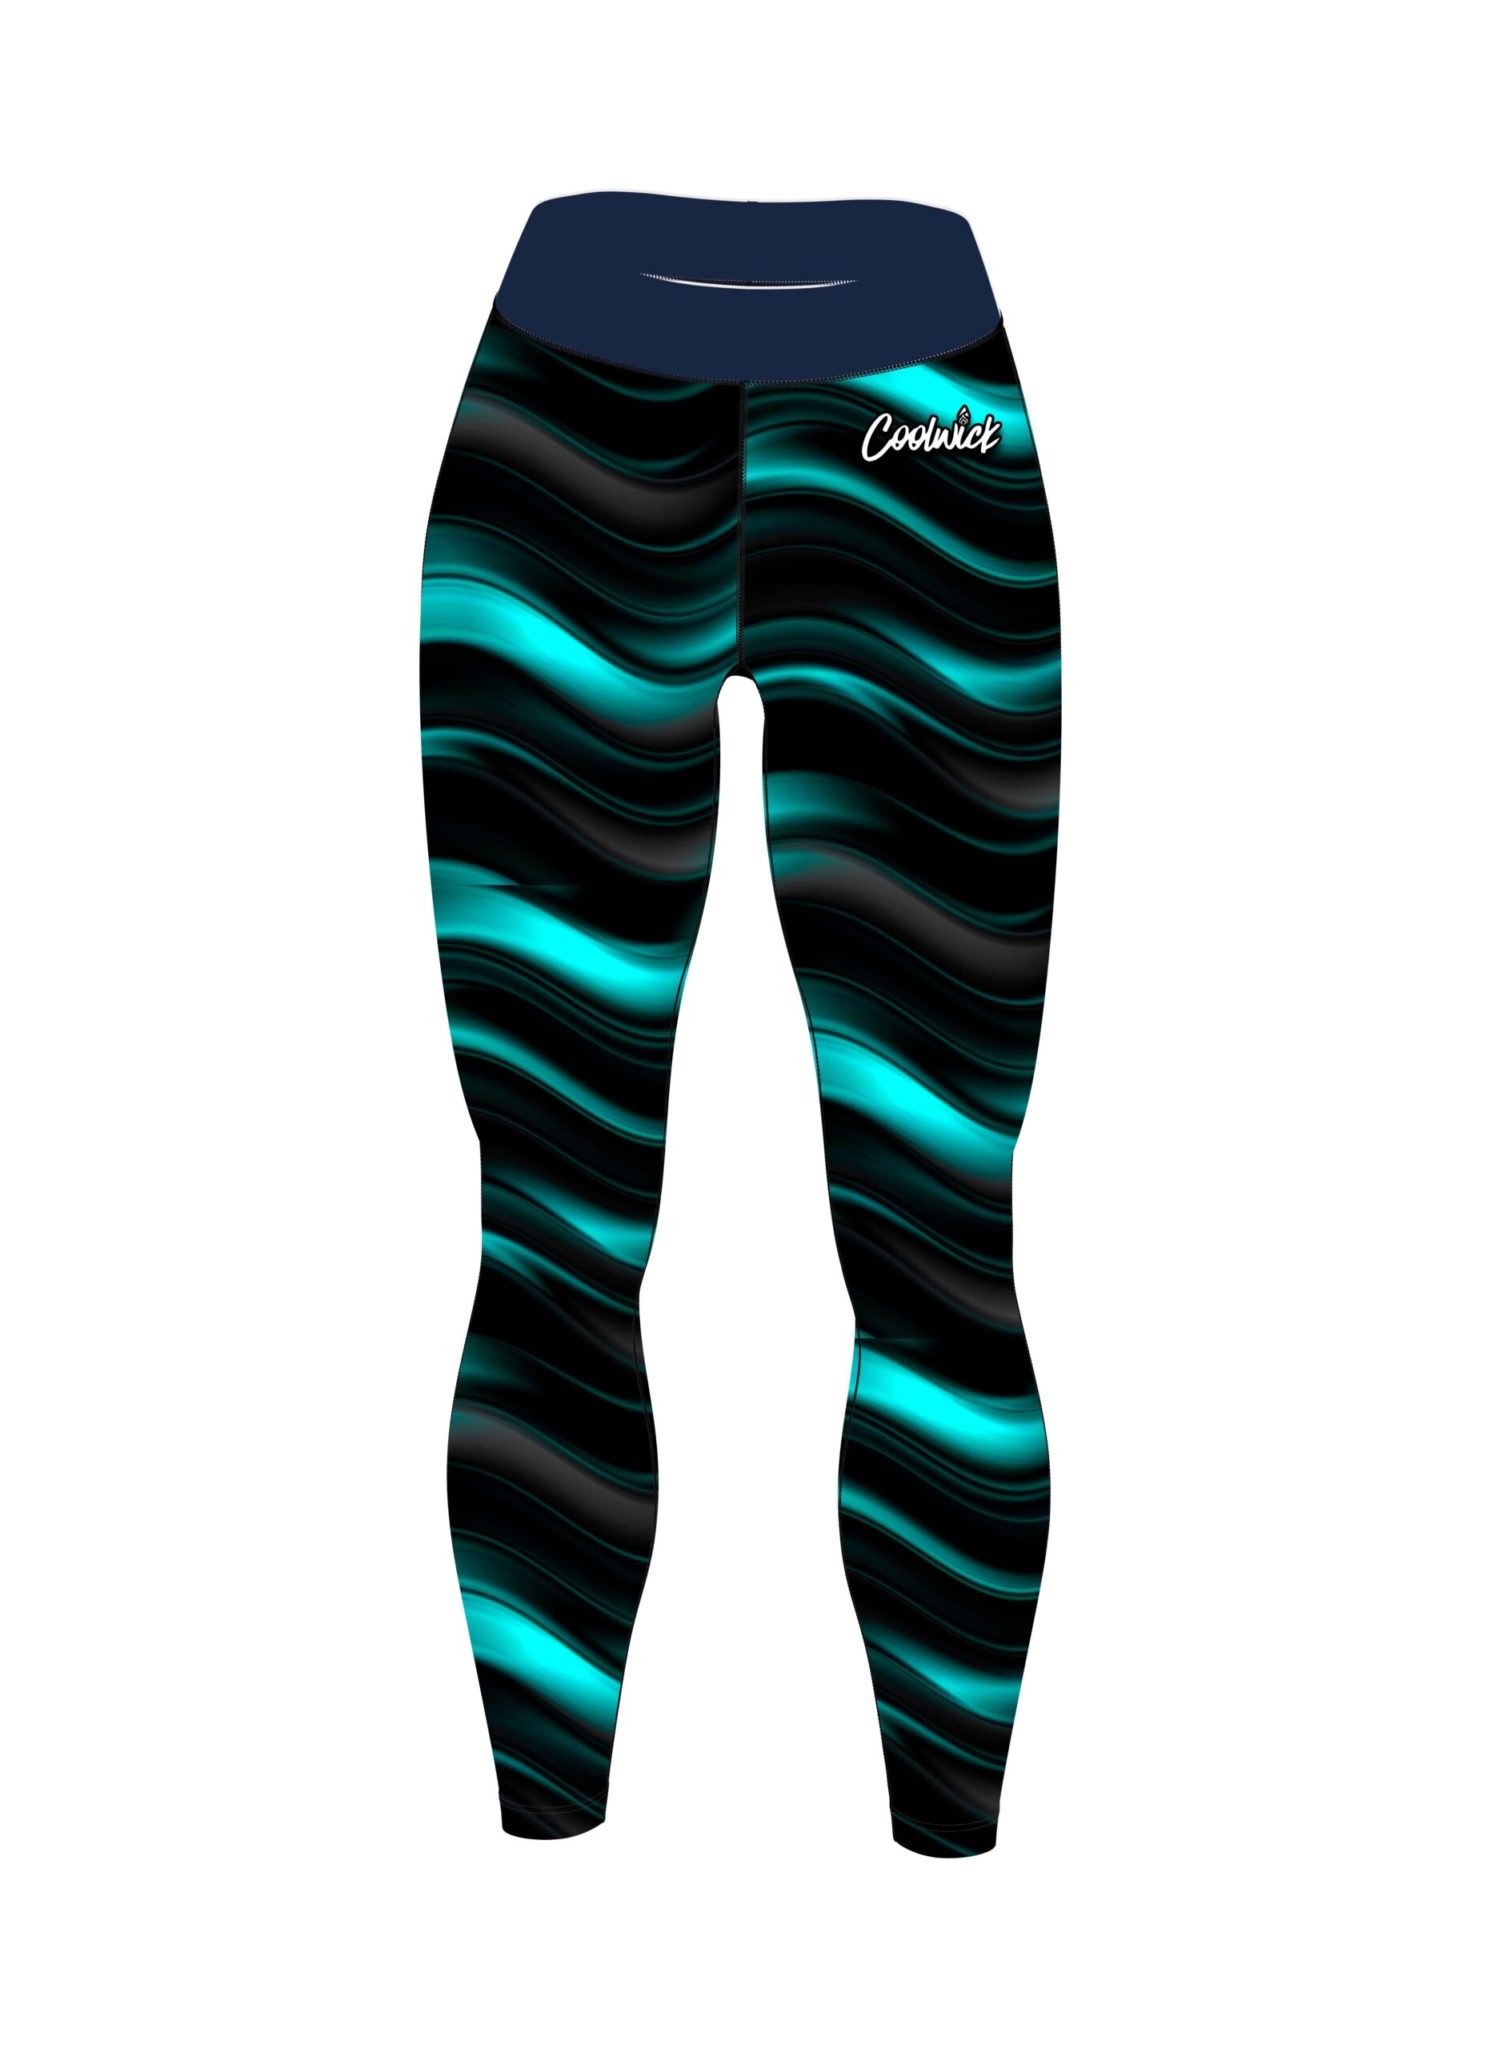 https://www.coolwick.com/wp-content/uploads/2021/03/LEGGING-front__teal-wave-scaled.jpg